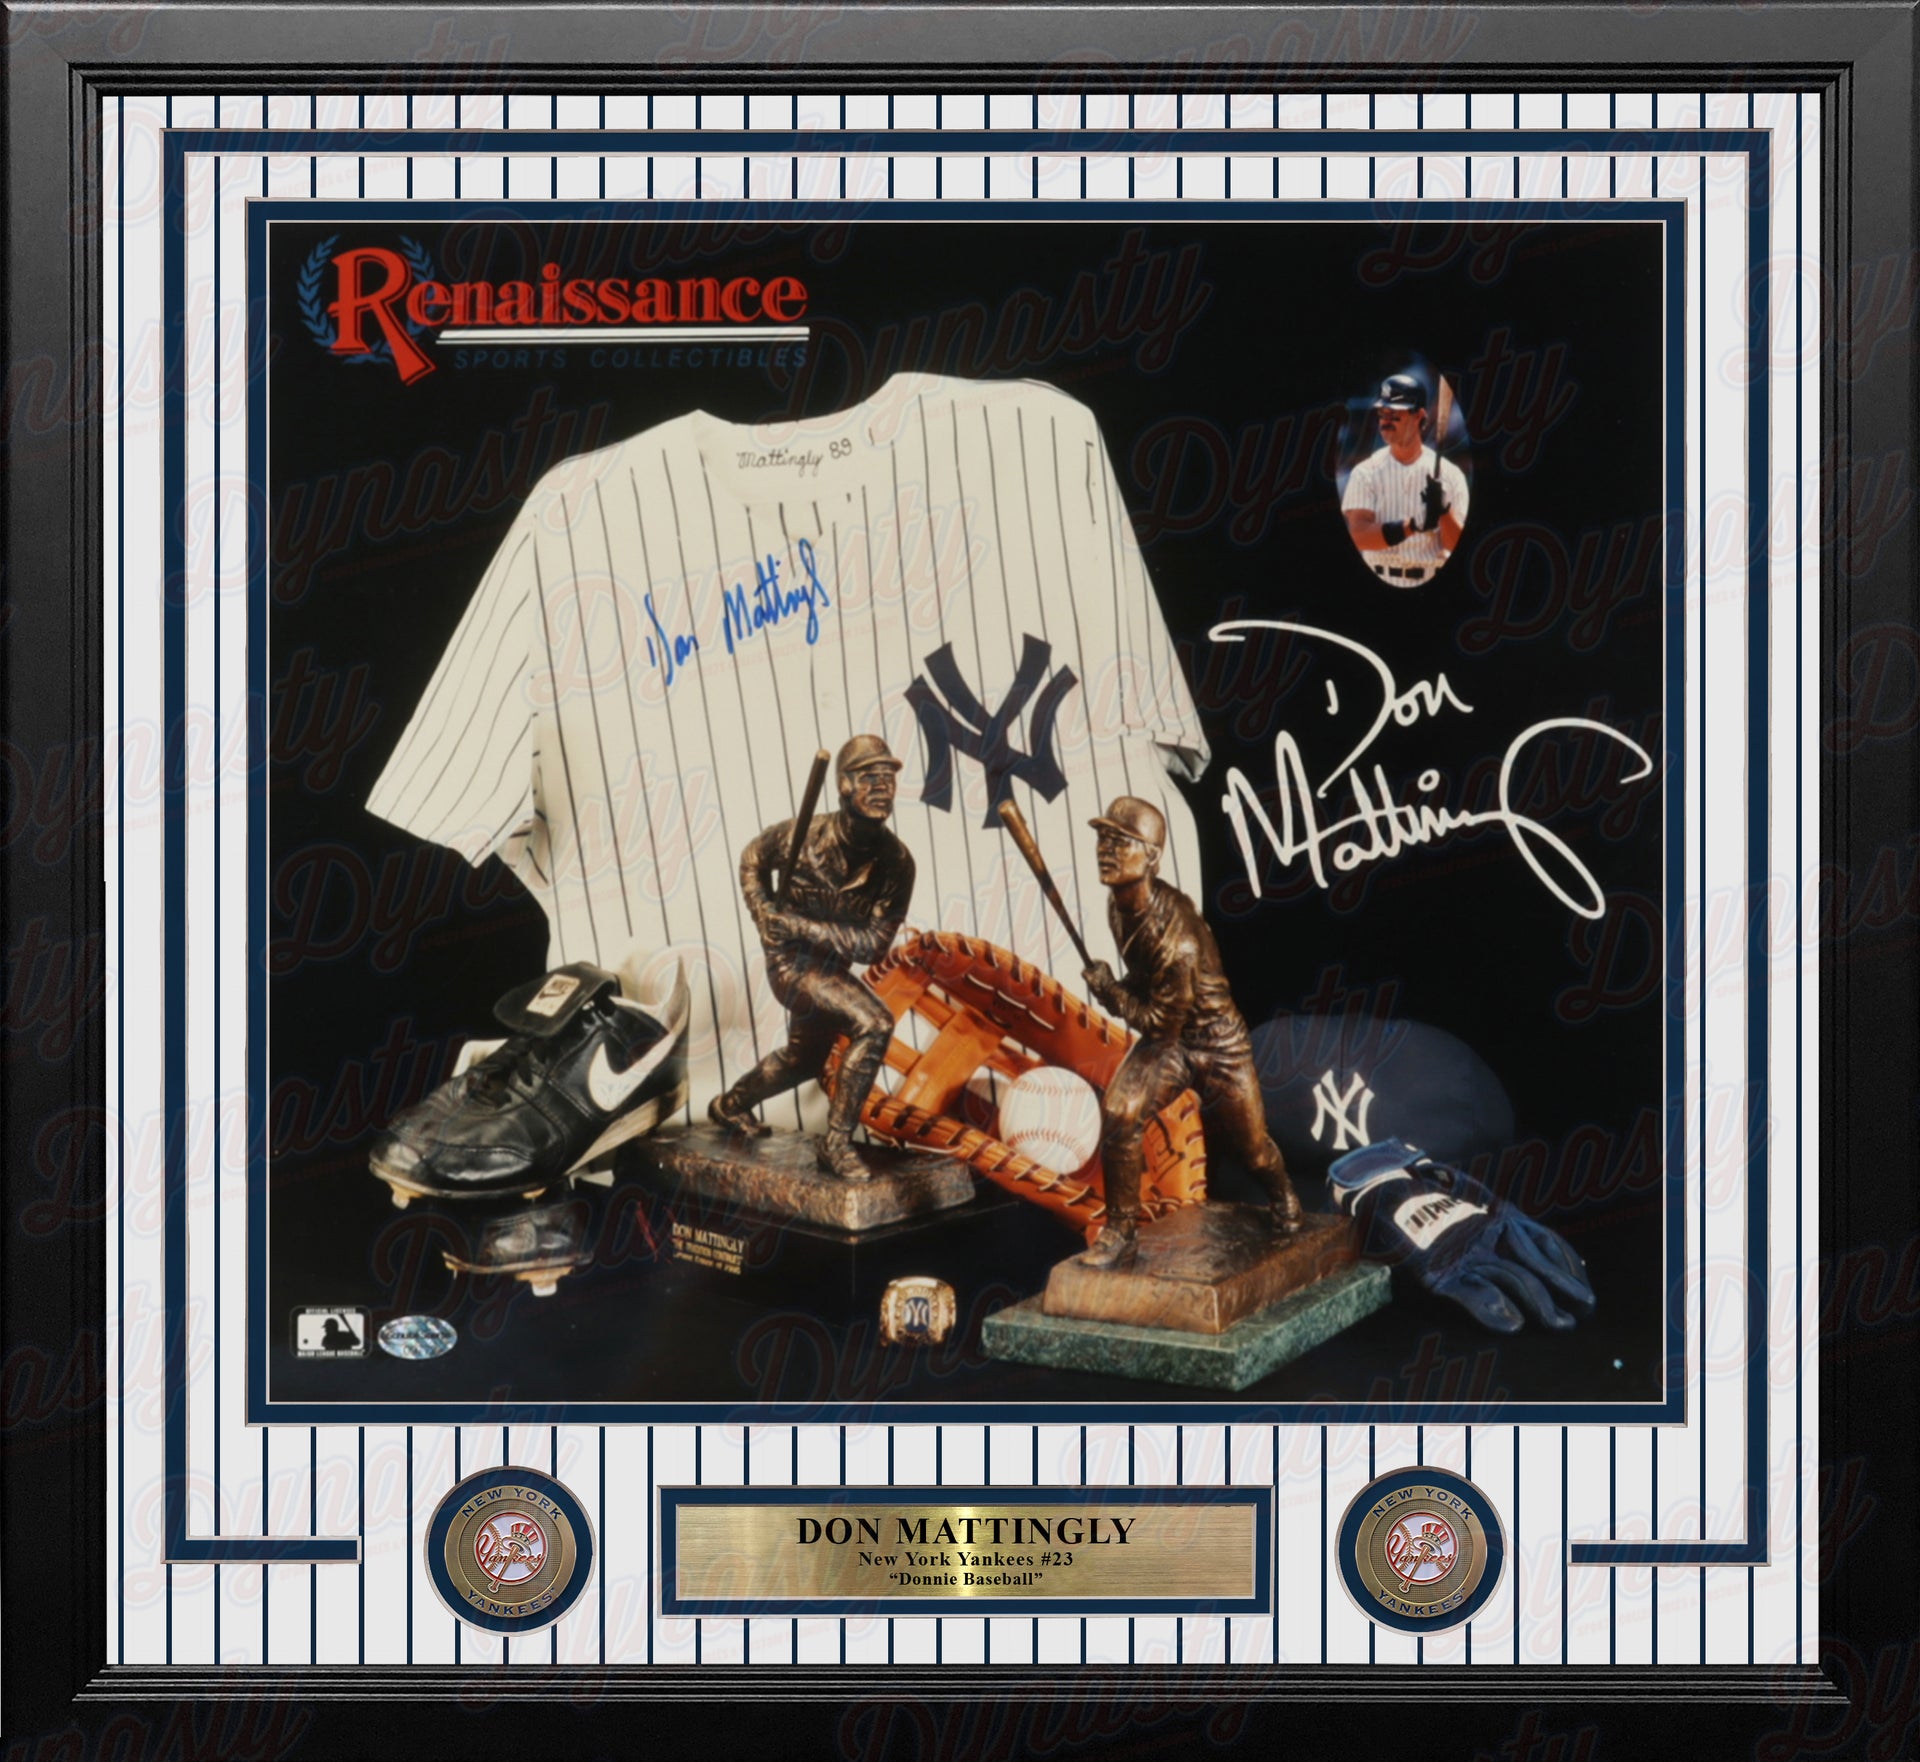 Don Mattingly New York Yankees Autographed 11" x 14" Framed Collage Baseball Photo - Dynasty Sports & Framing 